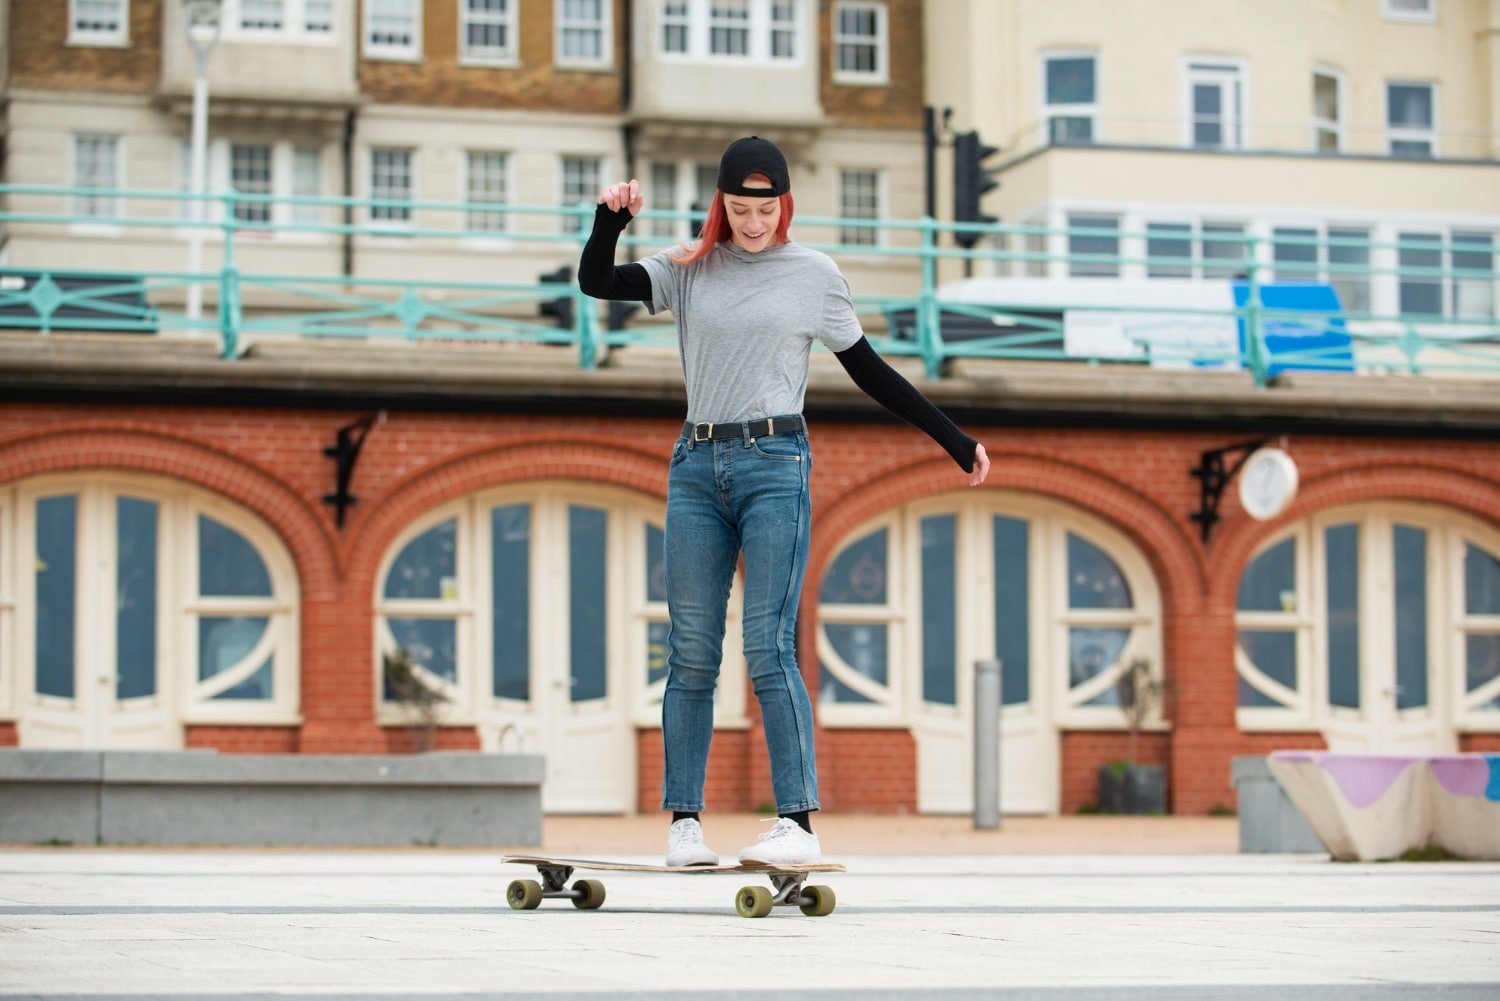 Read more about the article Ride The Streets In Style With Meepo Board’s High-Performance Electric Skateboards